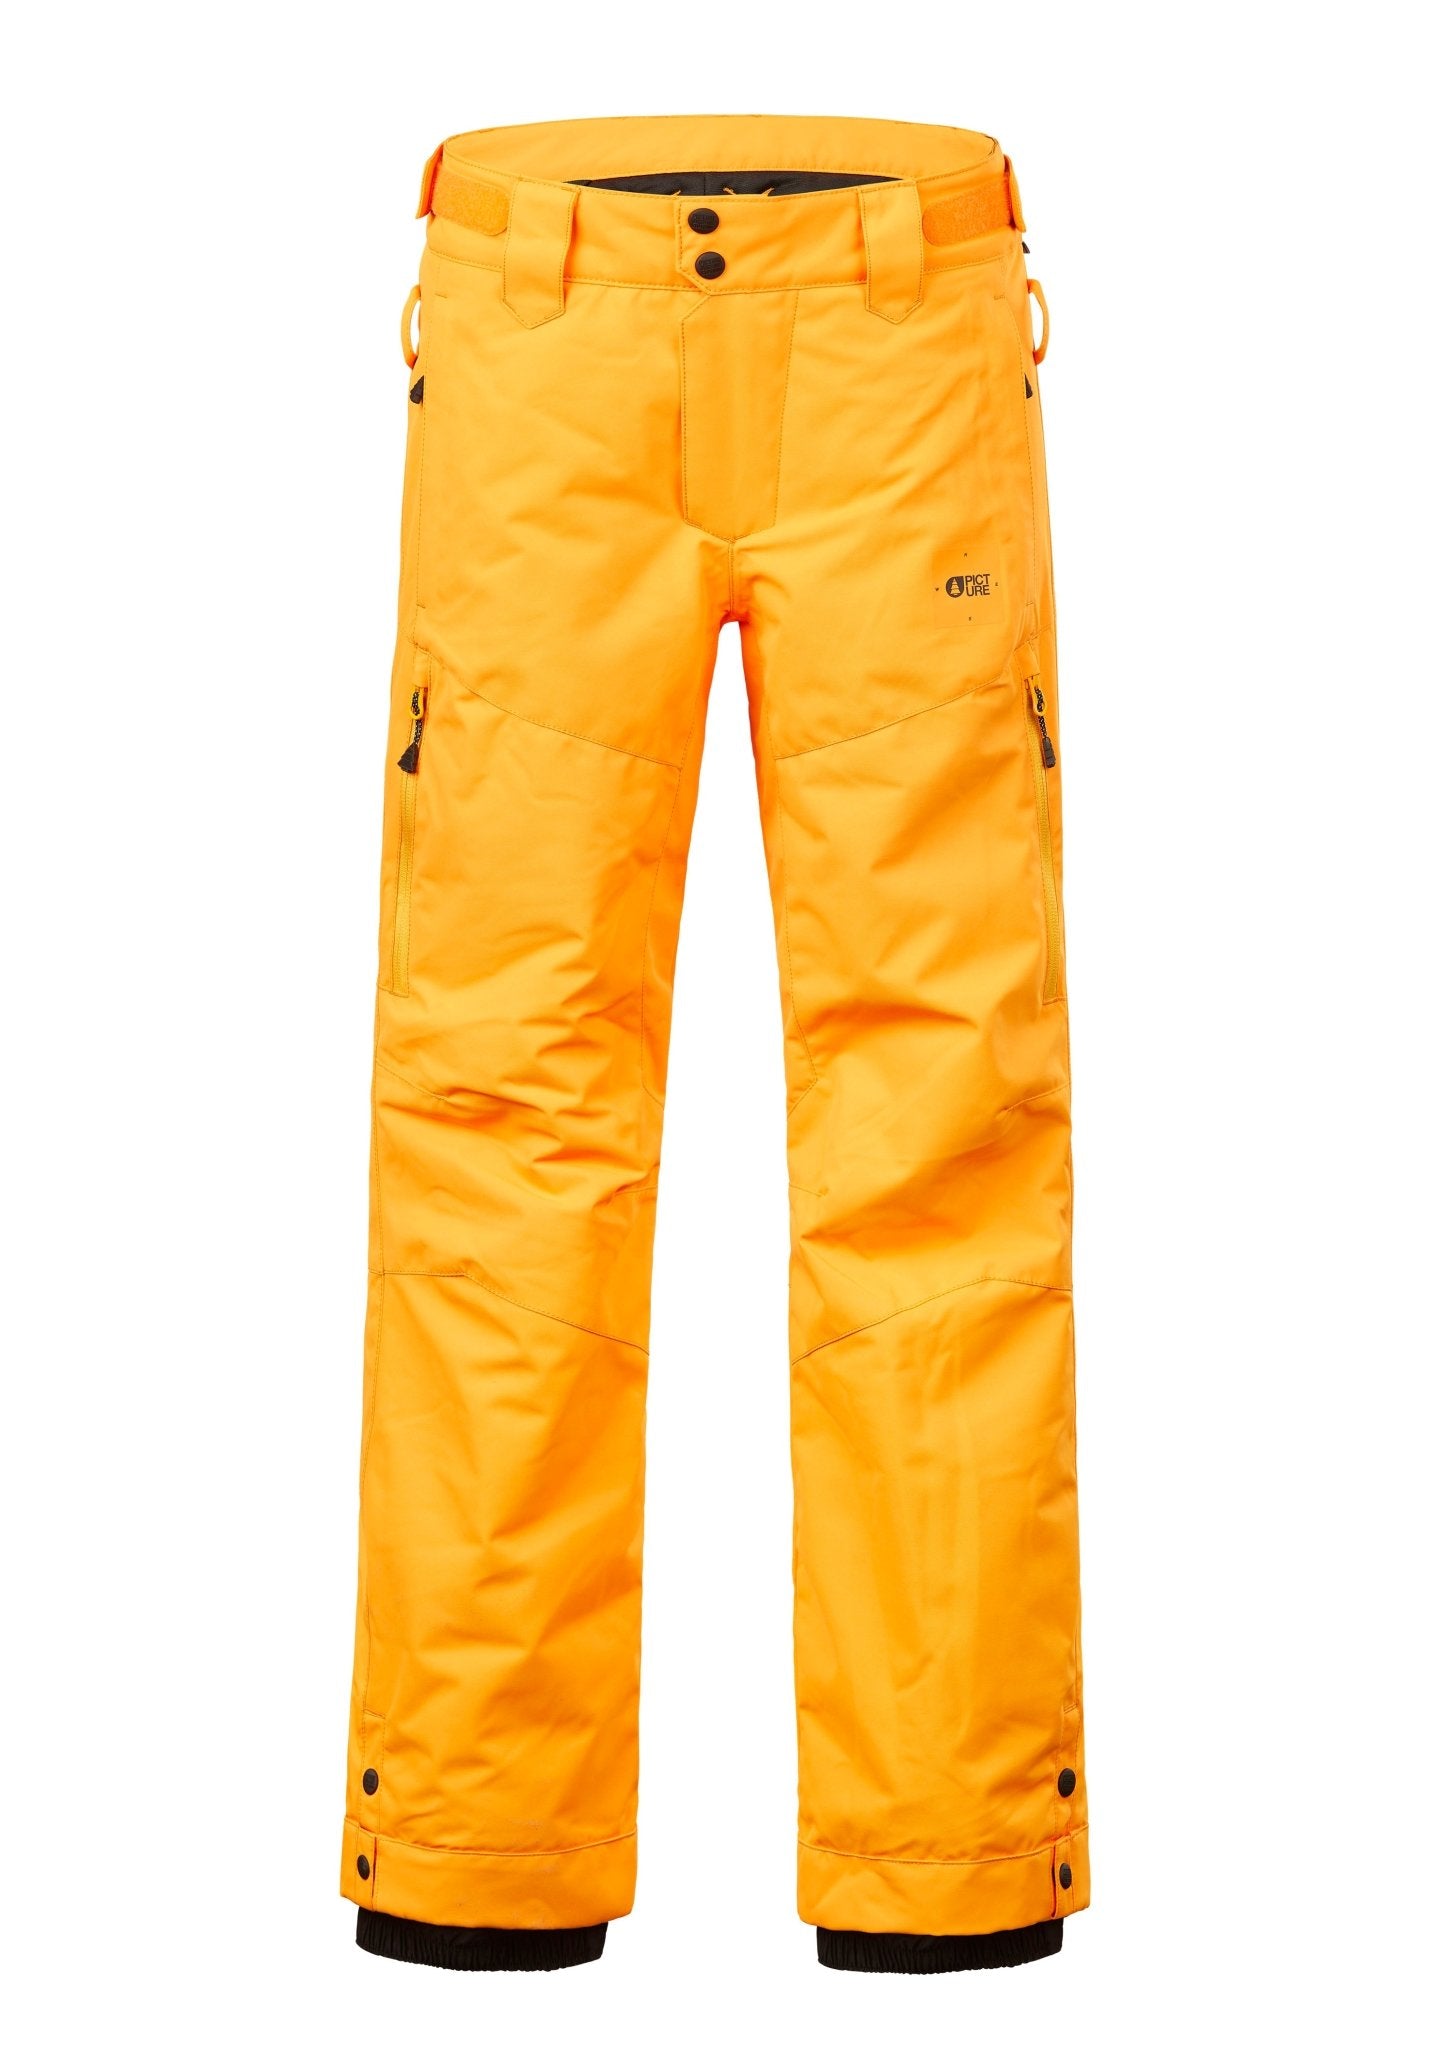 Picture Time Kids Pant W23 - Snowride Sports